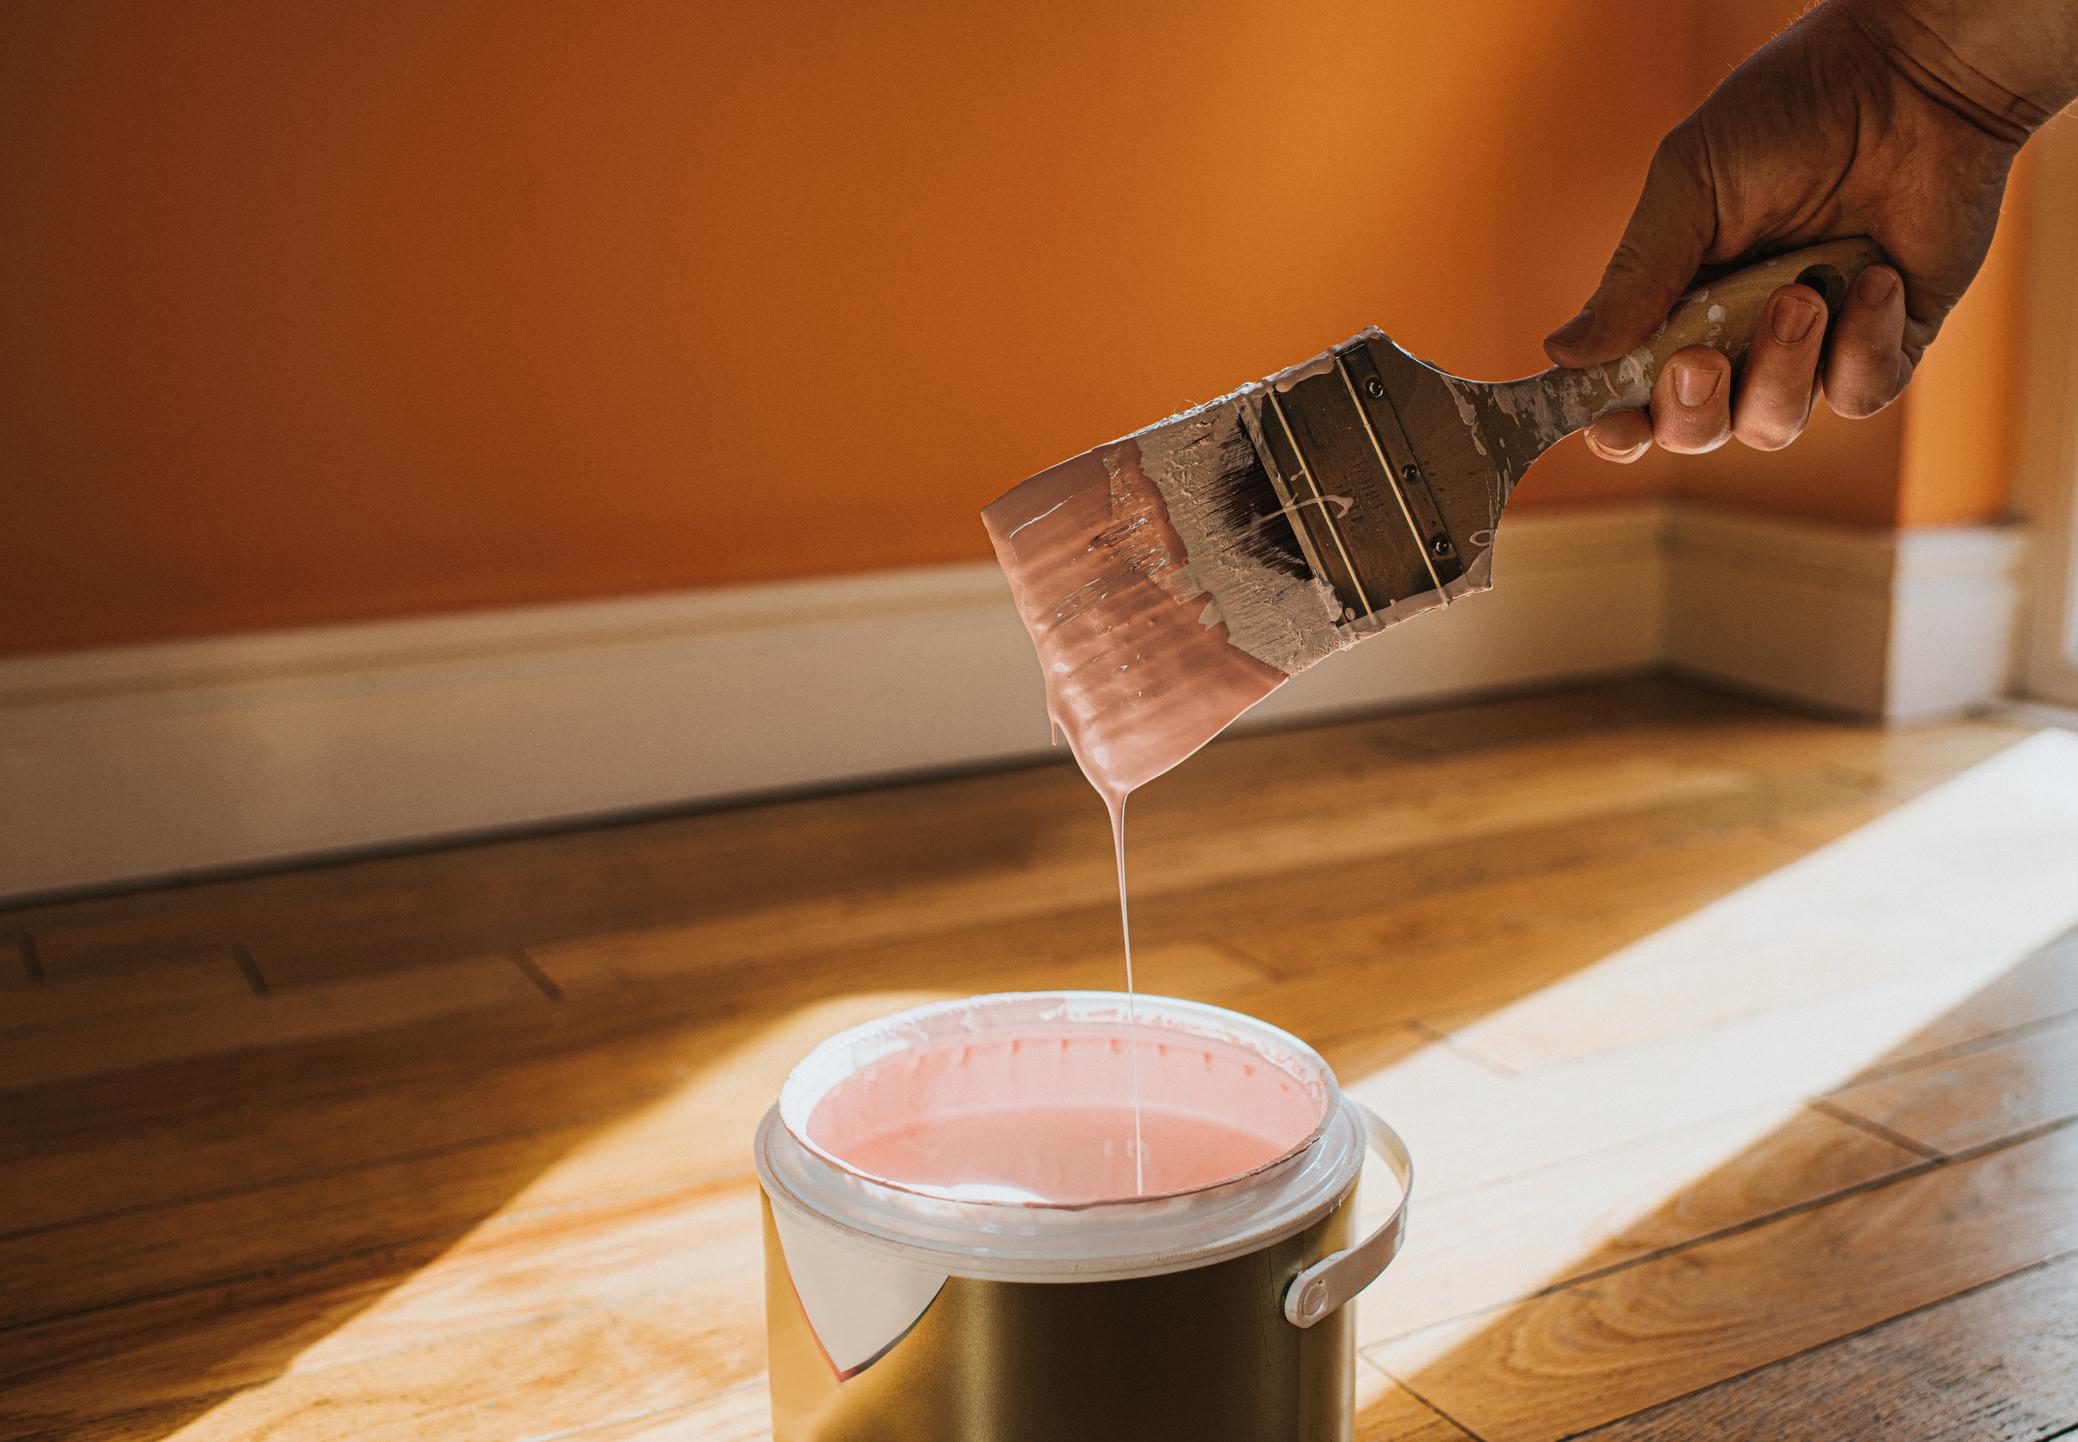  Hand dipping a paint brush into a large tin of pink paint.  